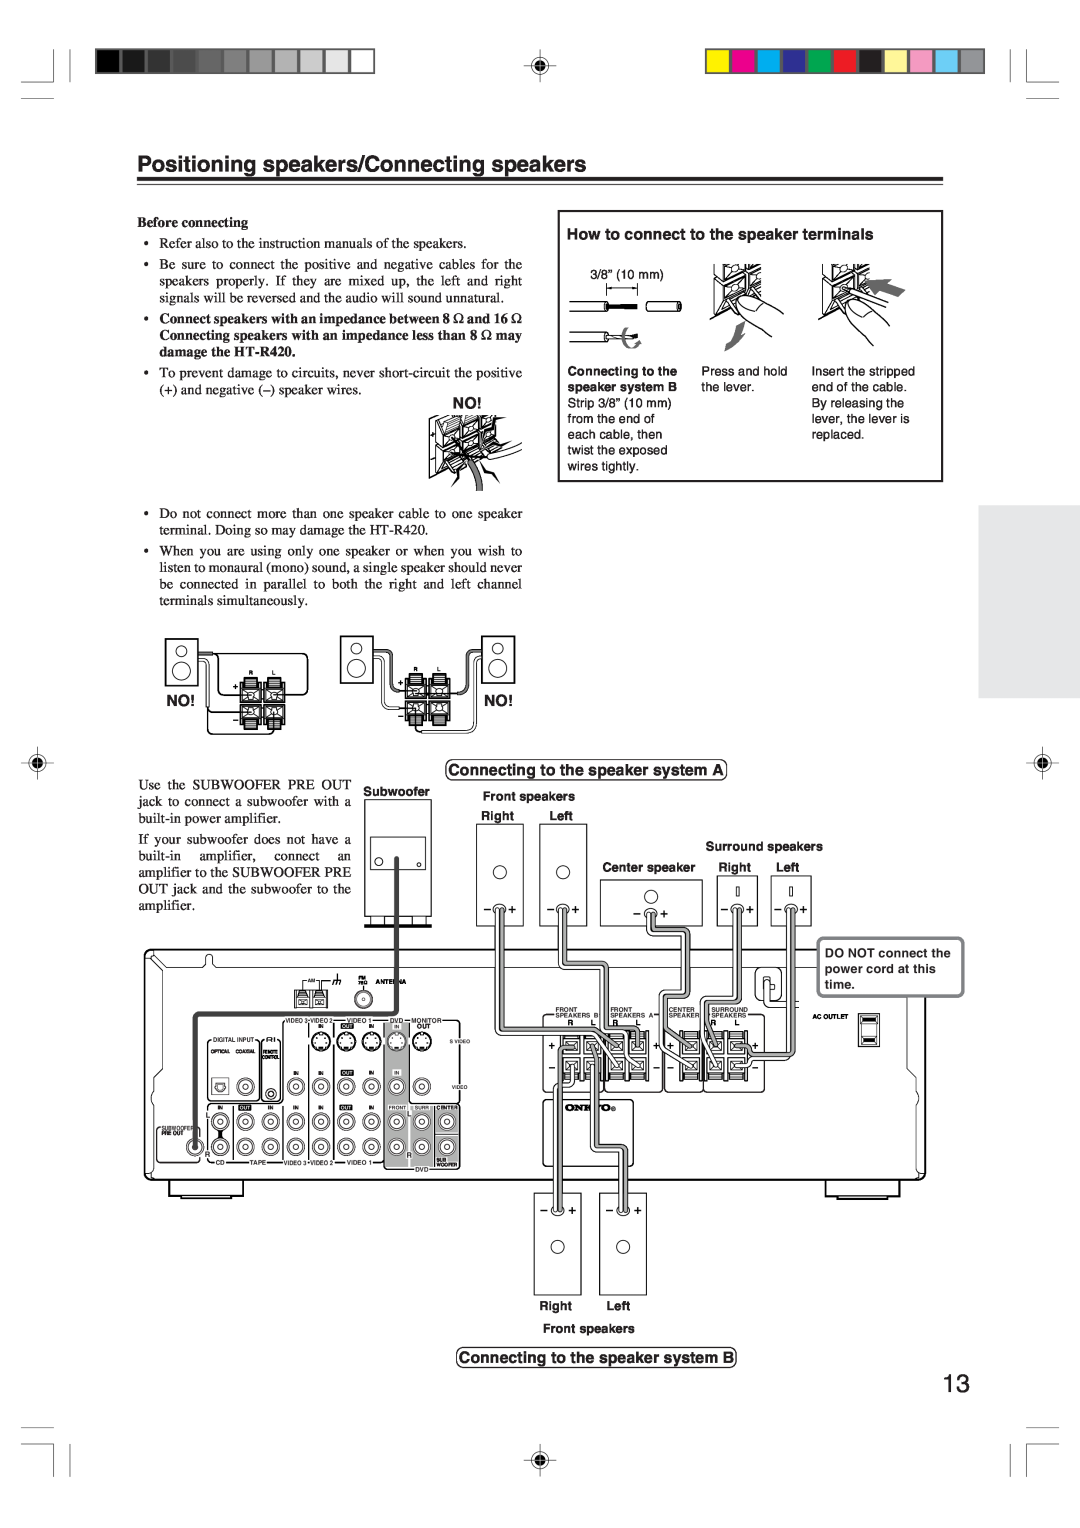 Onkyo HT-R420 appendix Positioning speakers/Connecting speakers, How to connect to the speaker terminals, Before connecting 